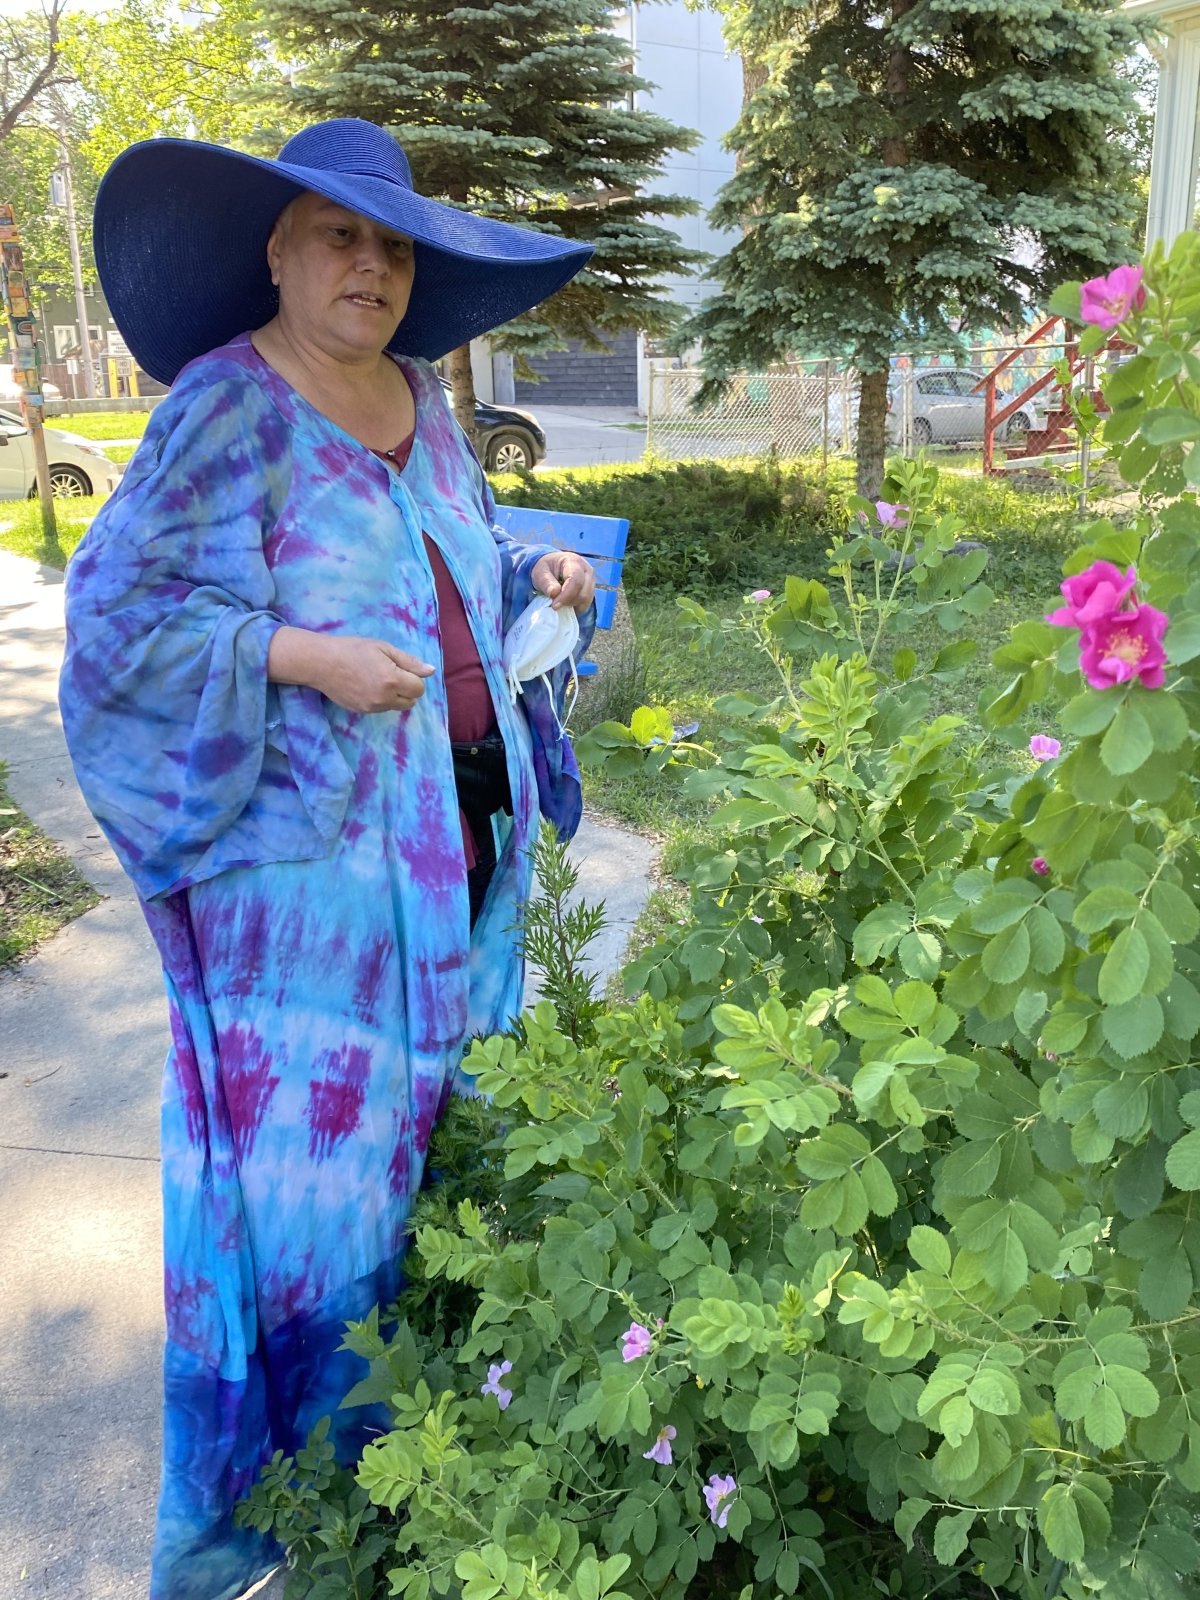 Audrey Logan helps run a community garden using Indigenous cultivation methods that existed thousands of years before Europeans arrived with their ways of gardening.